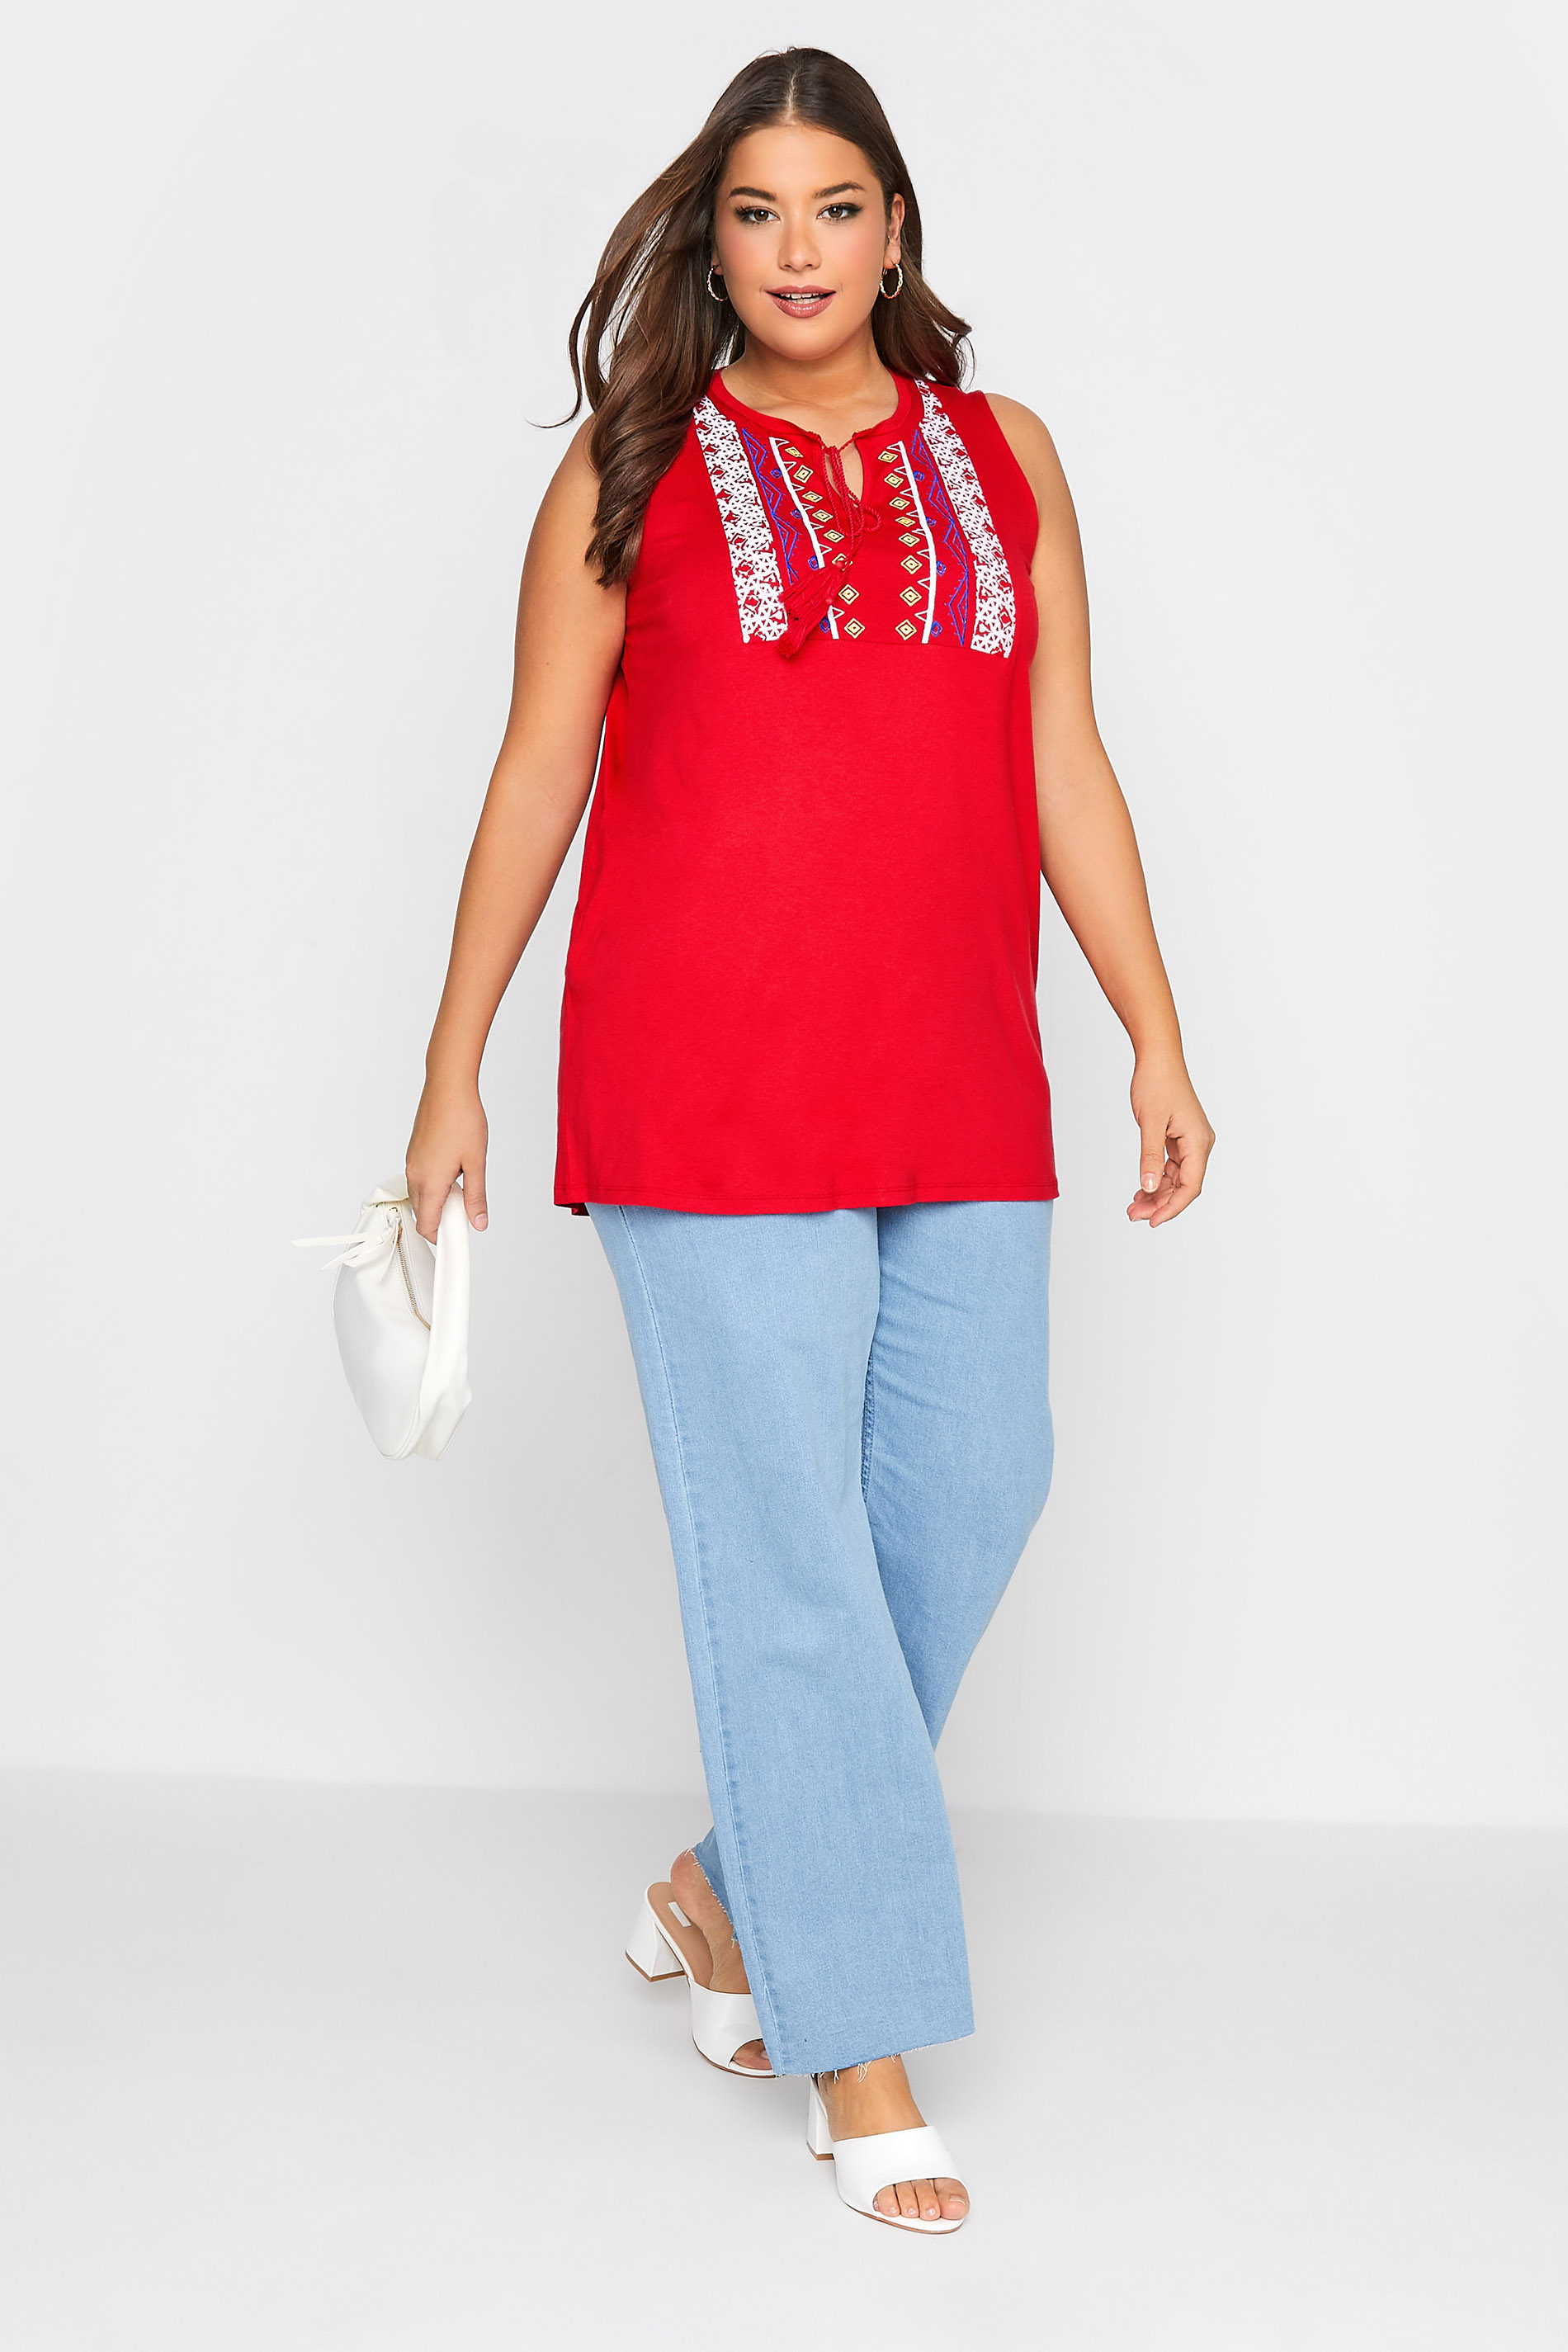 Grande taille  Tops Grande taille  Tops Jersey | Top Rouge Brodé Aztèque sans Manches - PH26151